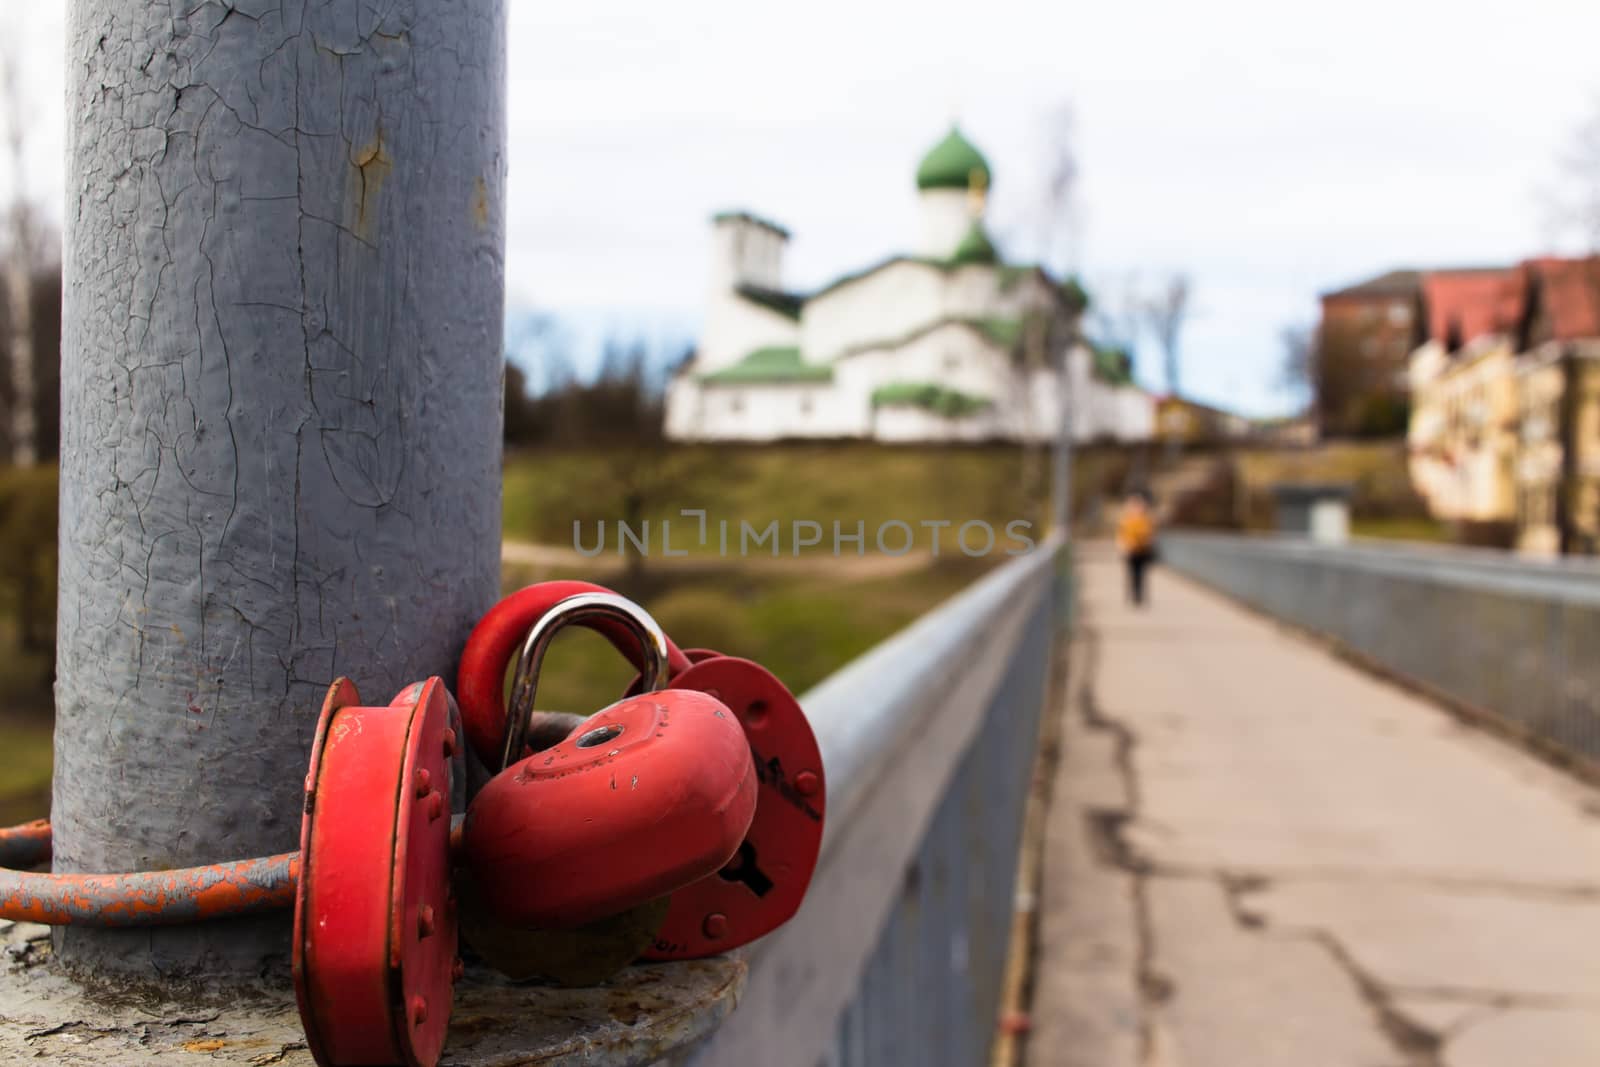 Group of red padlocks against the background of the orthodox church.